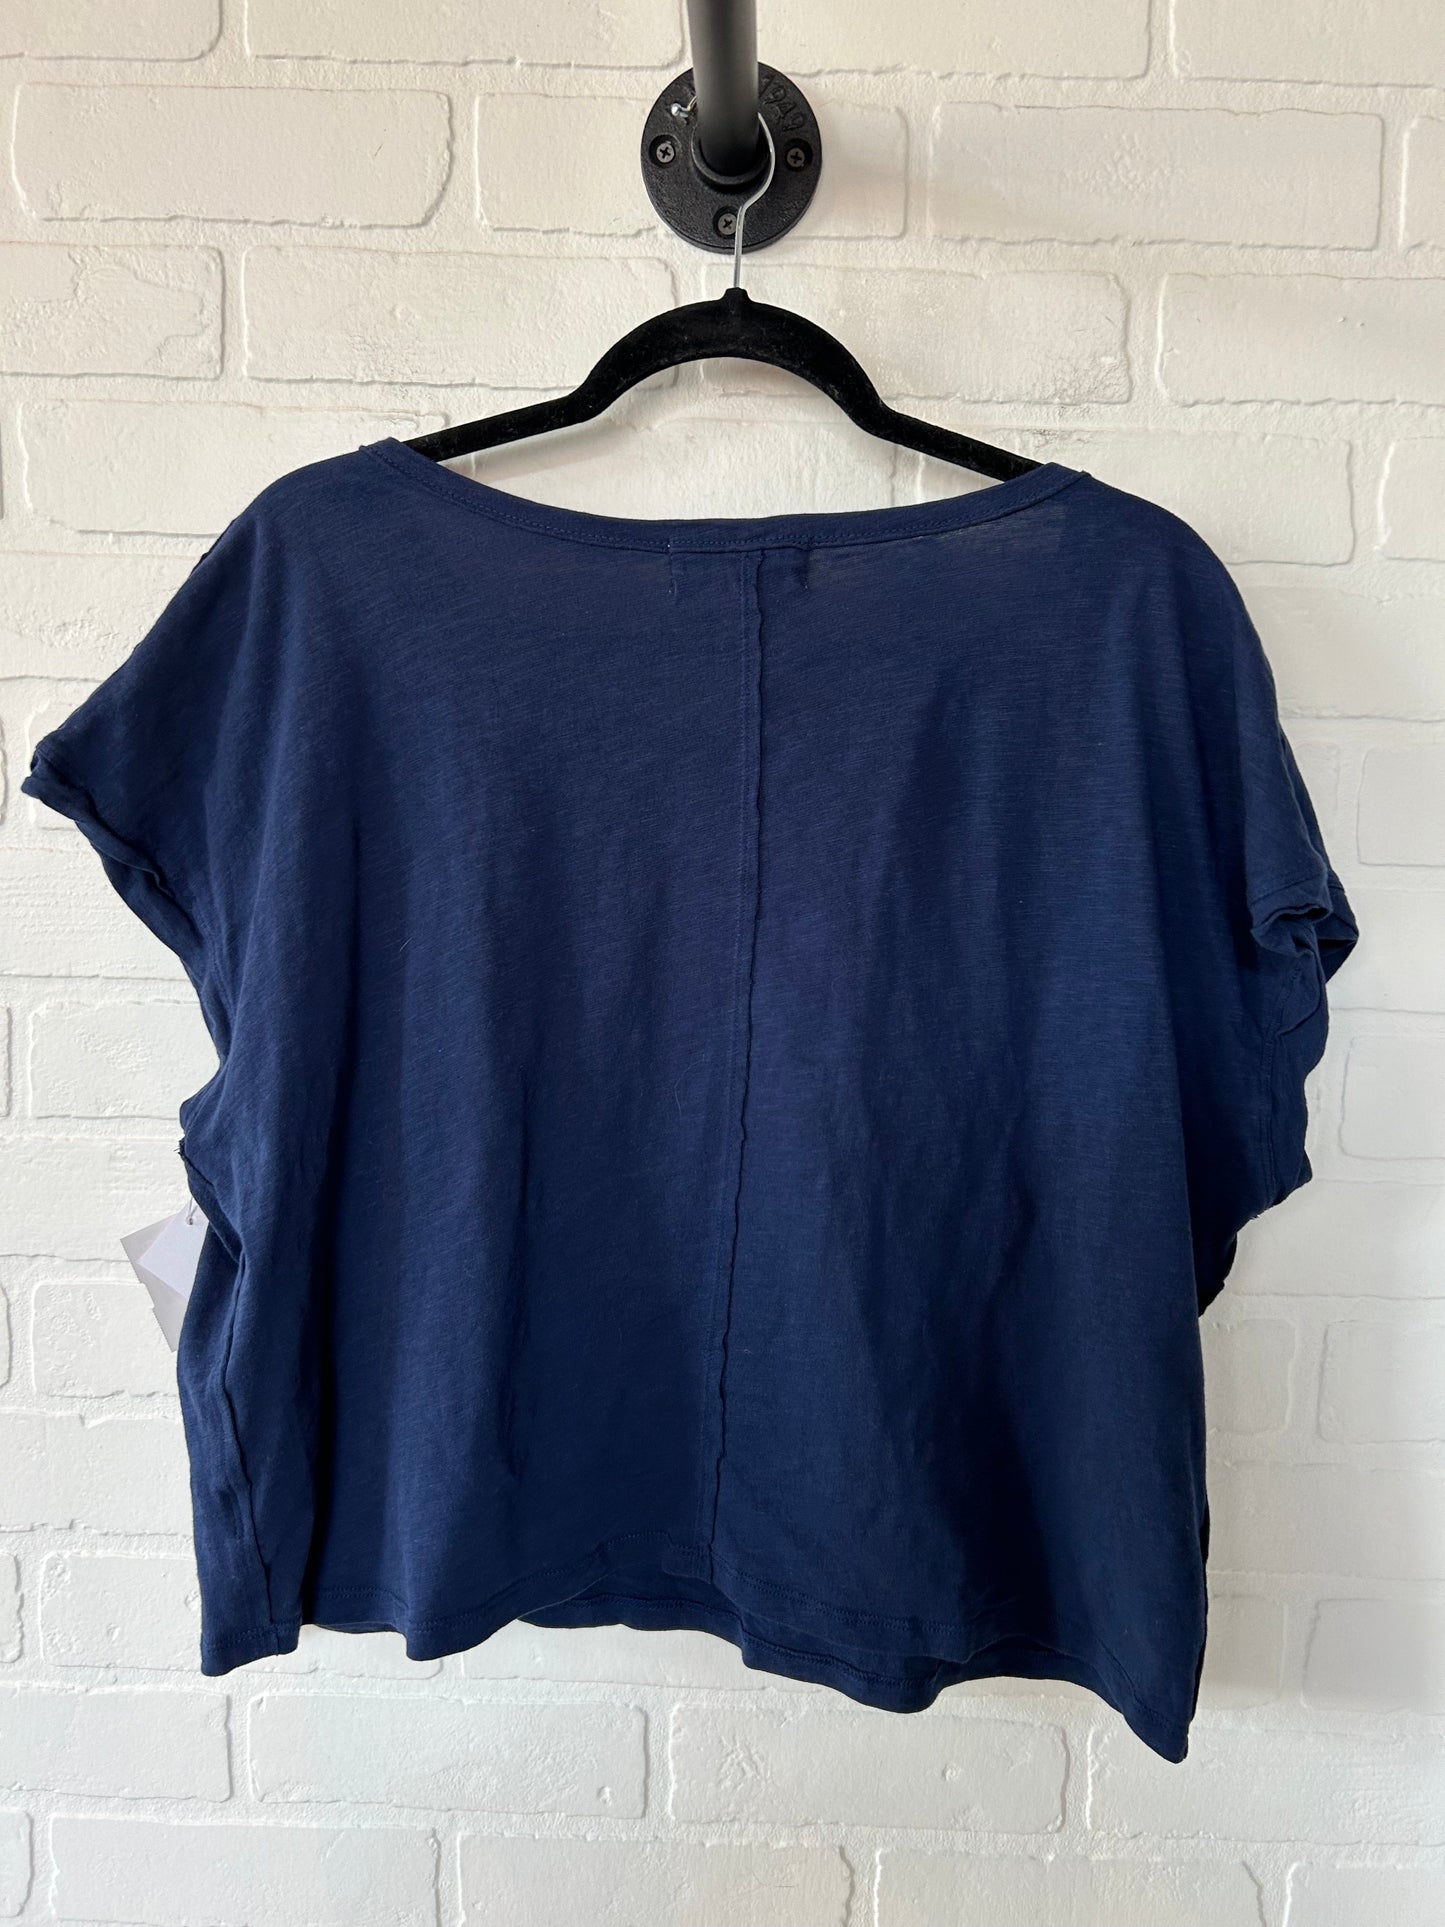 Blue Top Short Sleeve Basic Clothes Mentor, Size L